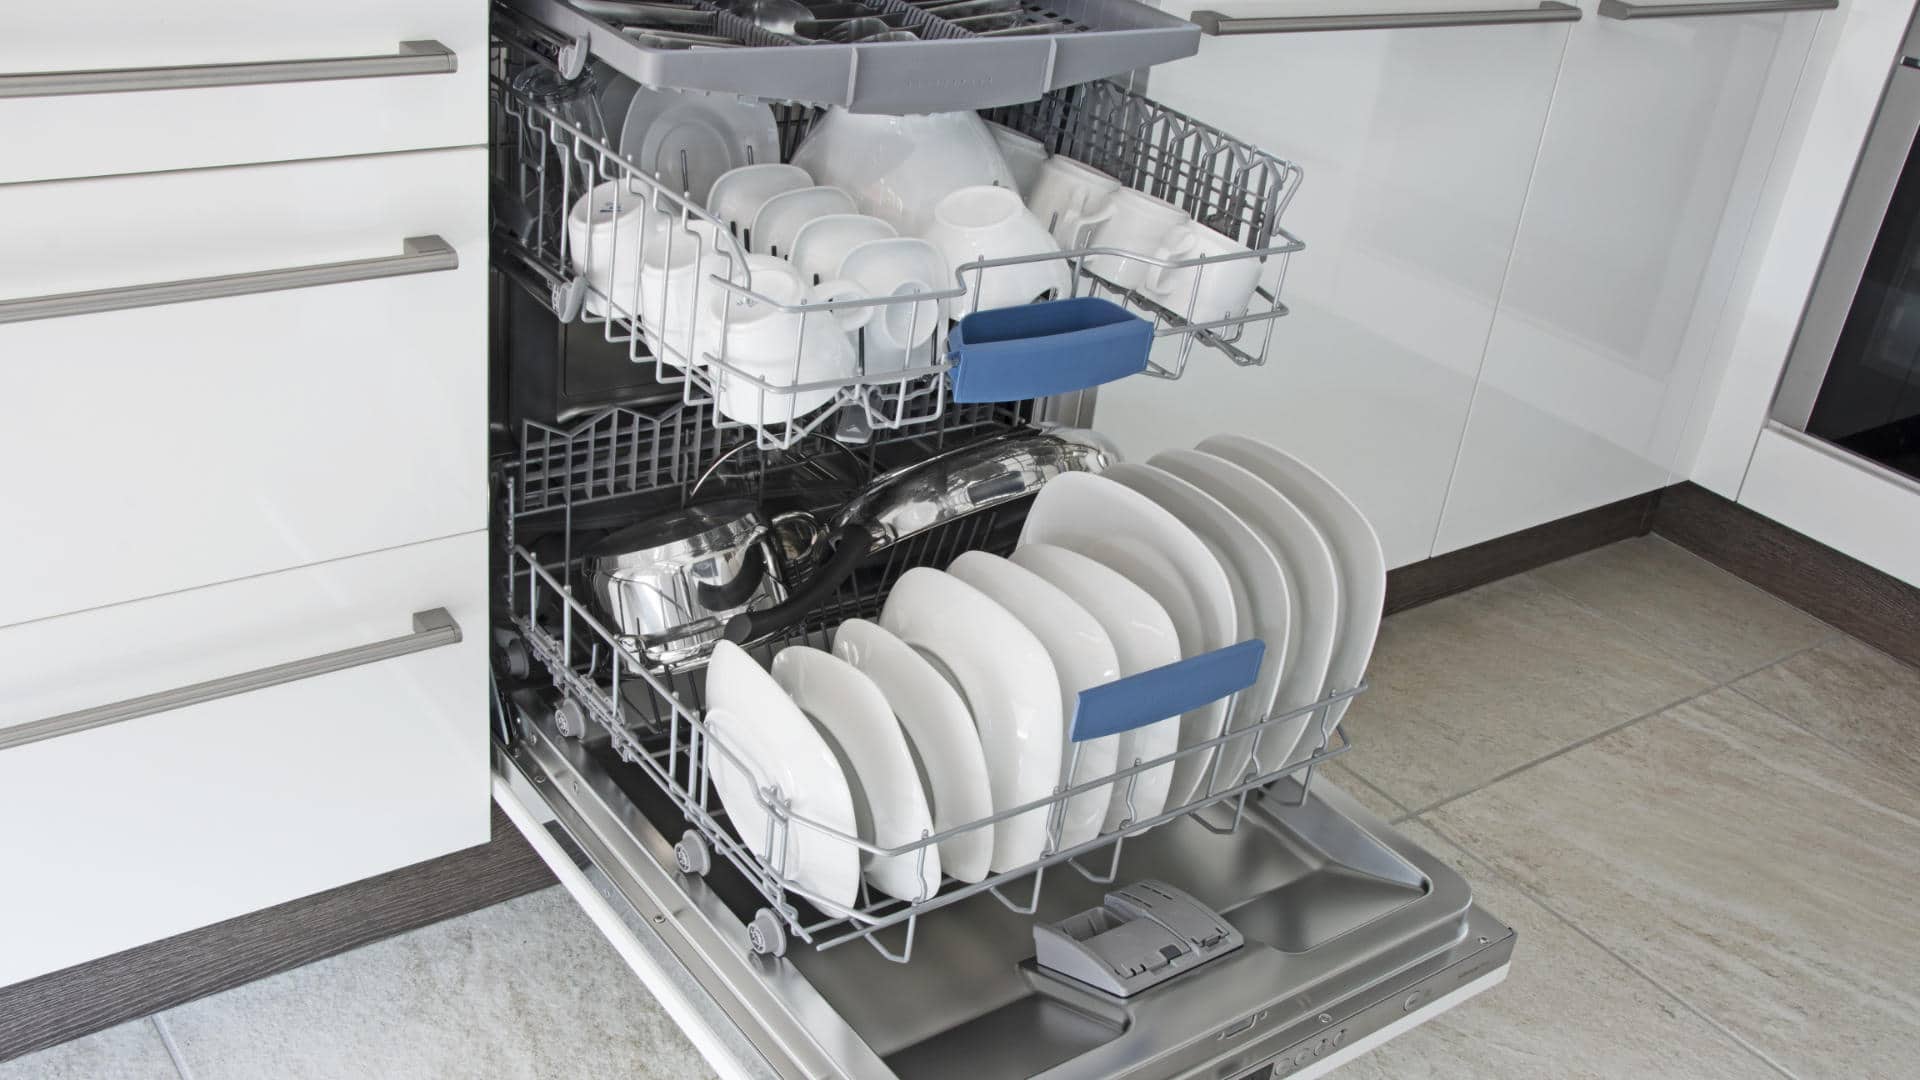 Dishwasher not drying? Here are 8 reasons why